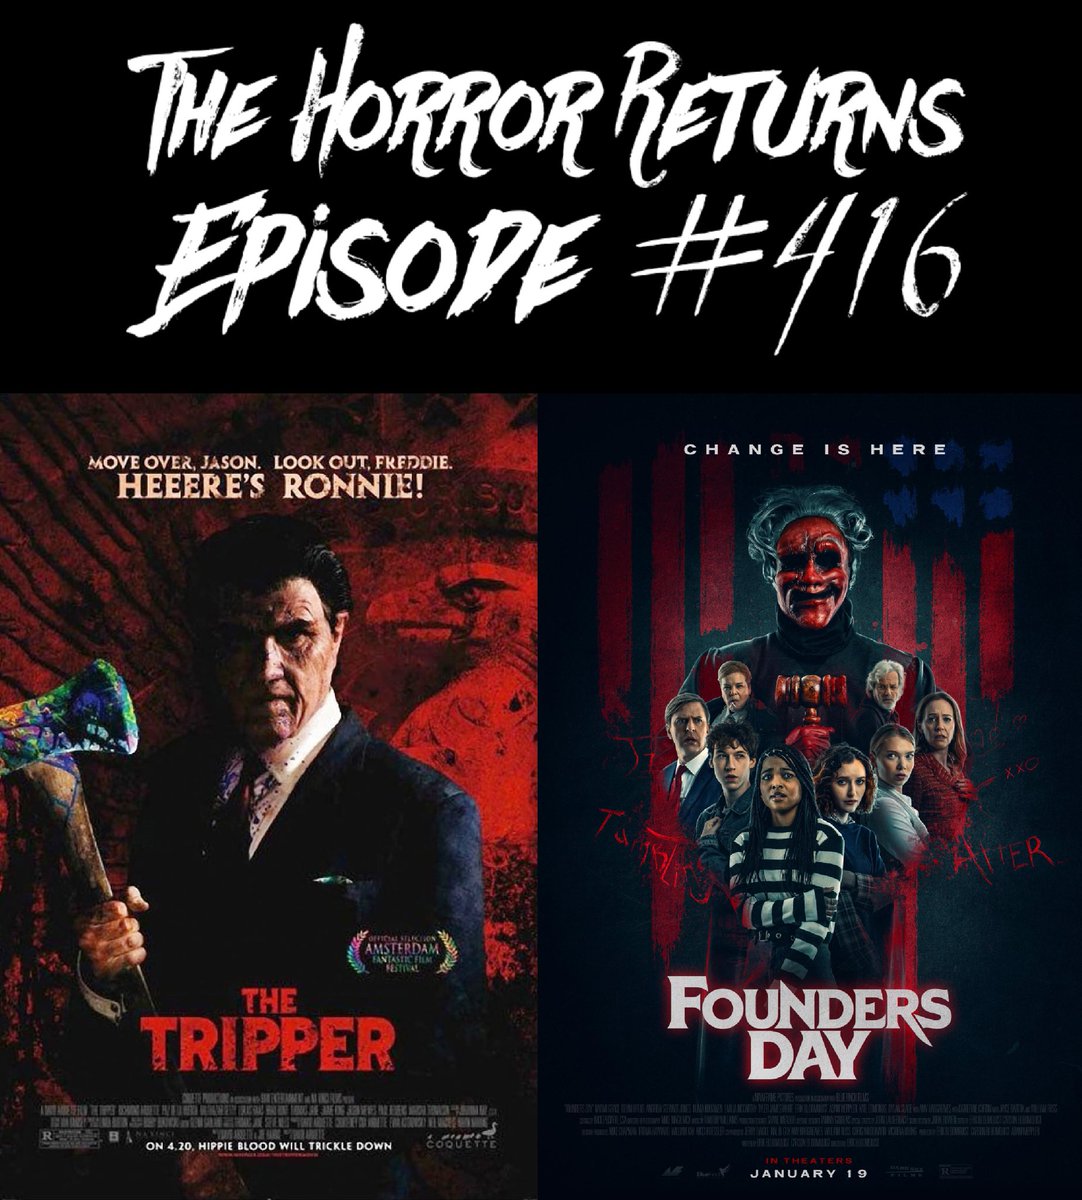 #TheHorrorReturns - Ep. #416: #TheTripper (2006) & #FoundersDay (2024) Is Now Available At thehorrorreturns.com. #THRPodcastNetwork #Horror #HorrorMovies #HorrorFamily #HorrorCommunity #HorrorPodcast #Podcast #Podcasting #PodLife #PodernFamily #PodcastHQ #PodNation #MutantFam